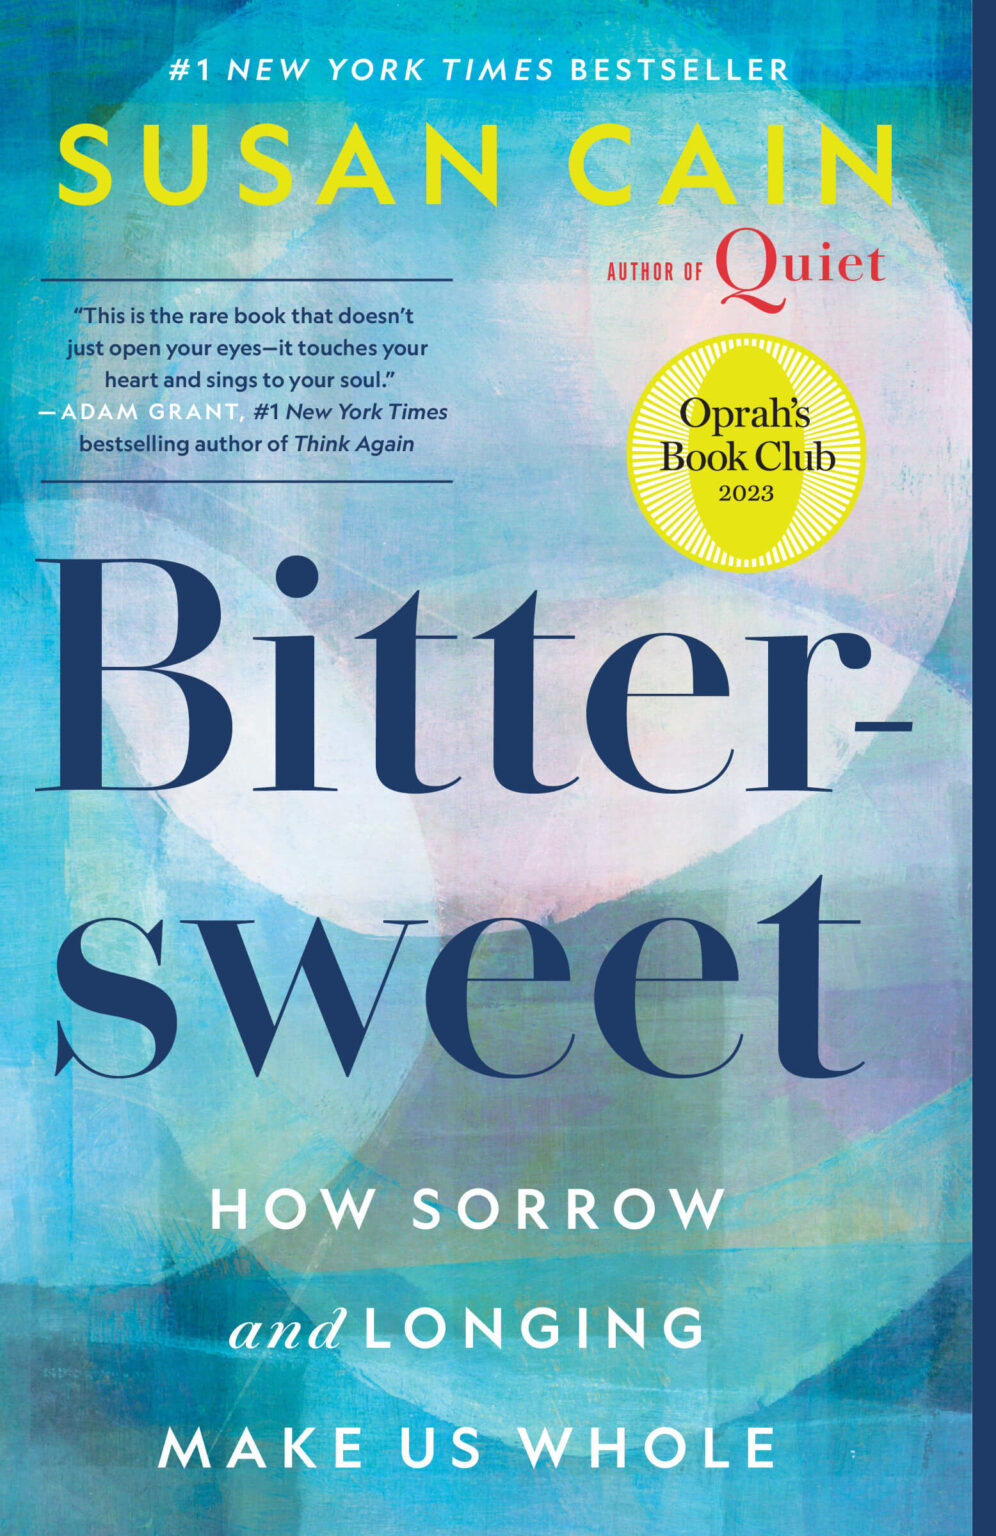 book cover for "Bittersweet:  How Sorrow and Longing Make Us Whole"